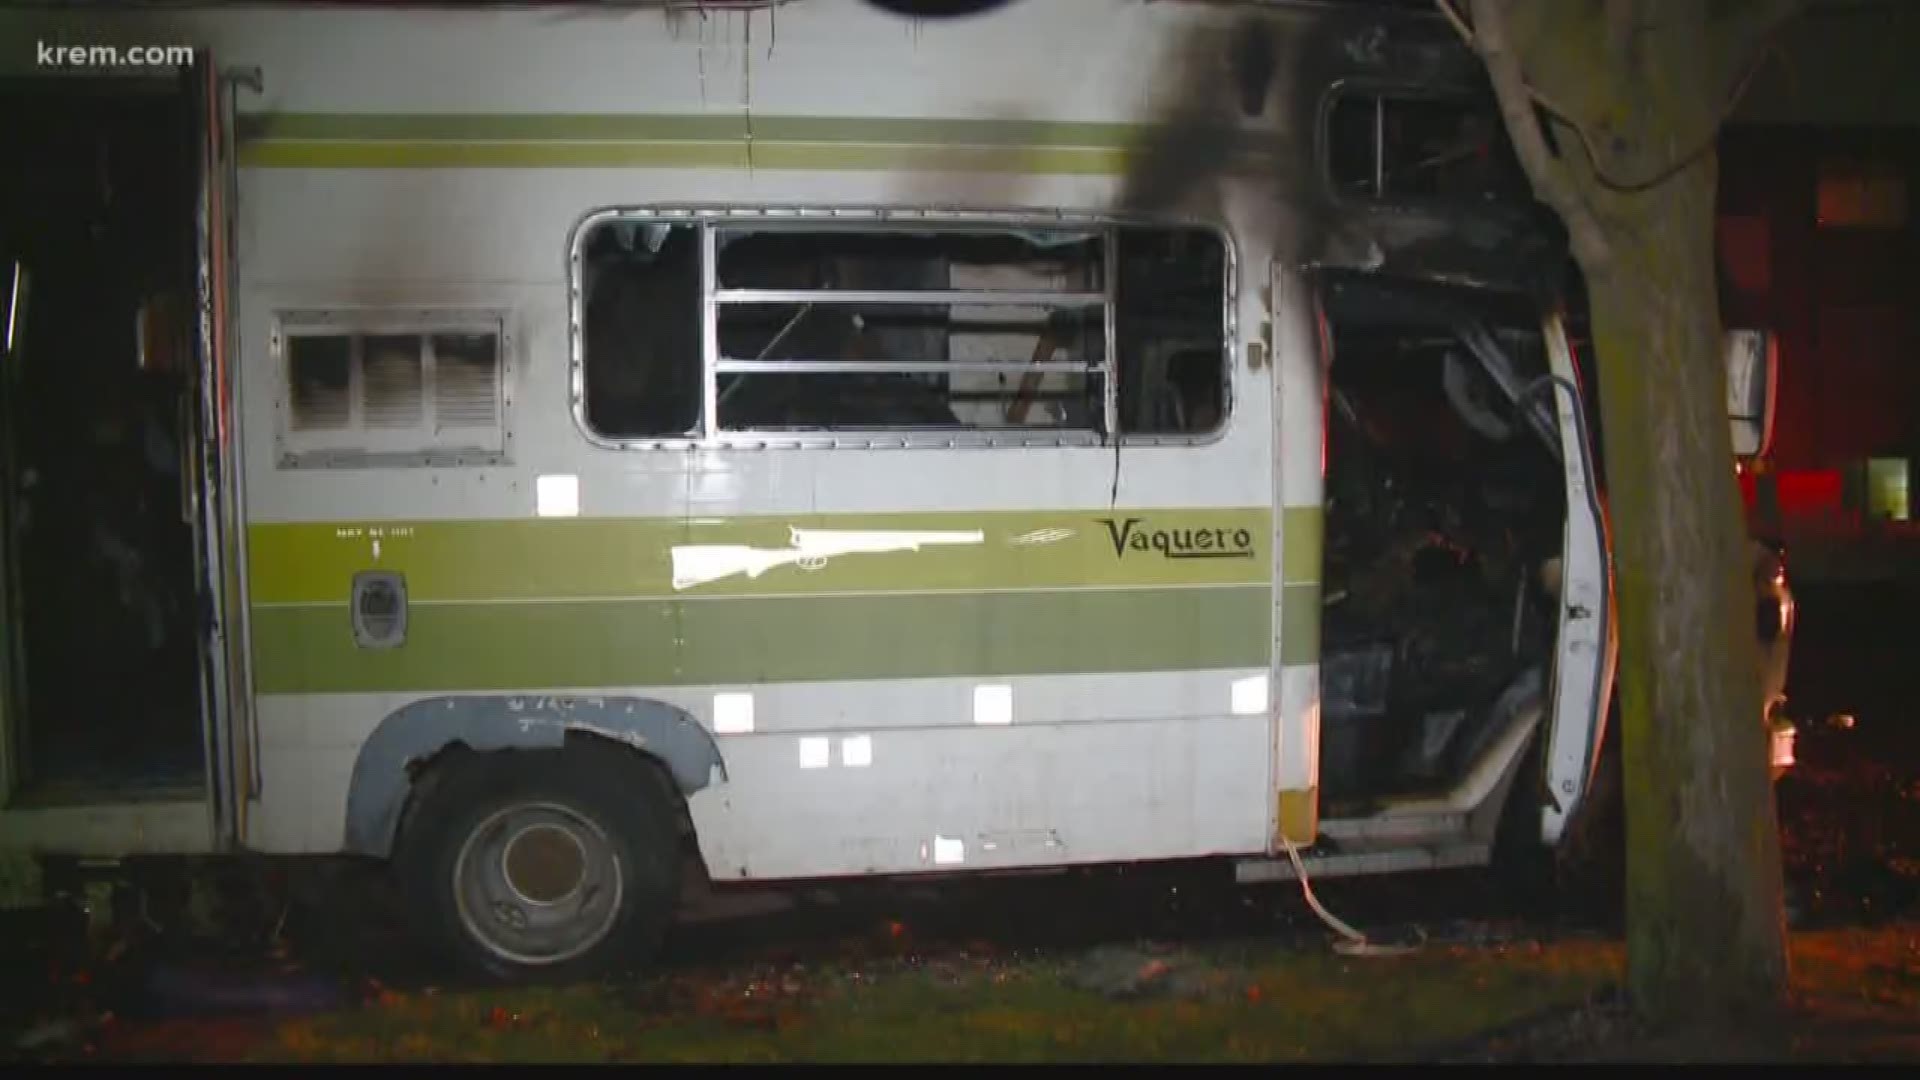 Critical burns forced a man to Seattle after his recreational vehicle burst into flames near Browne's addition last night and took the life of his dog.